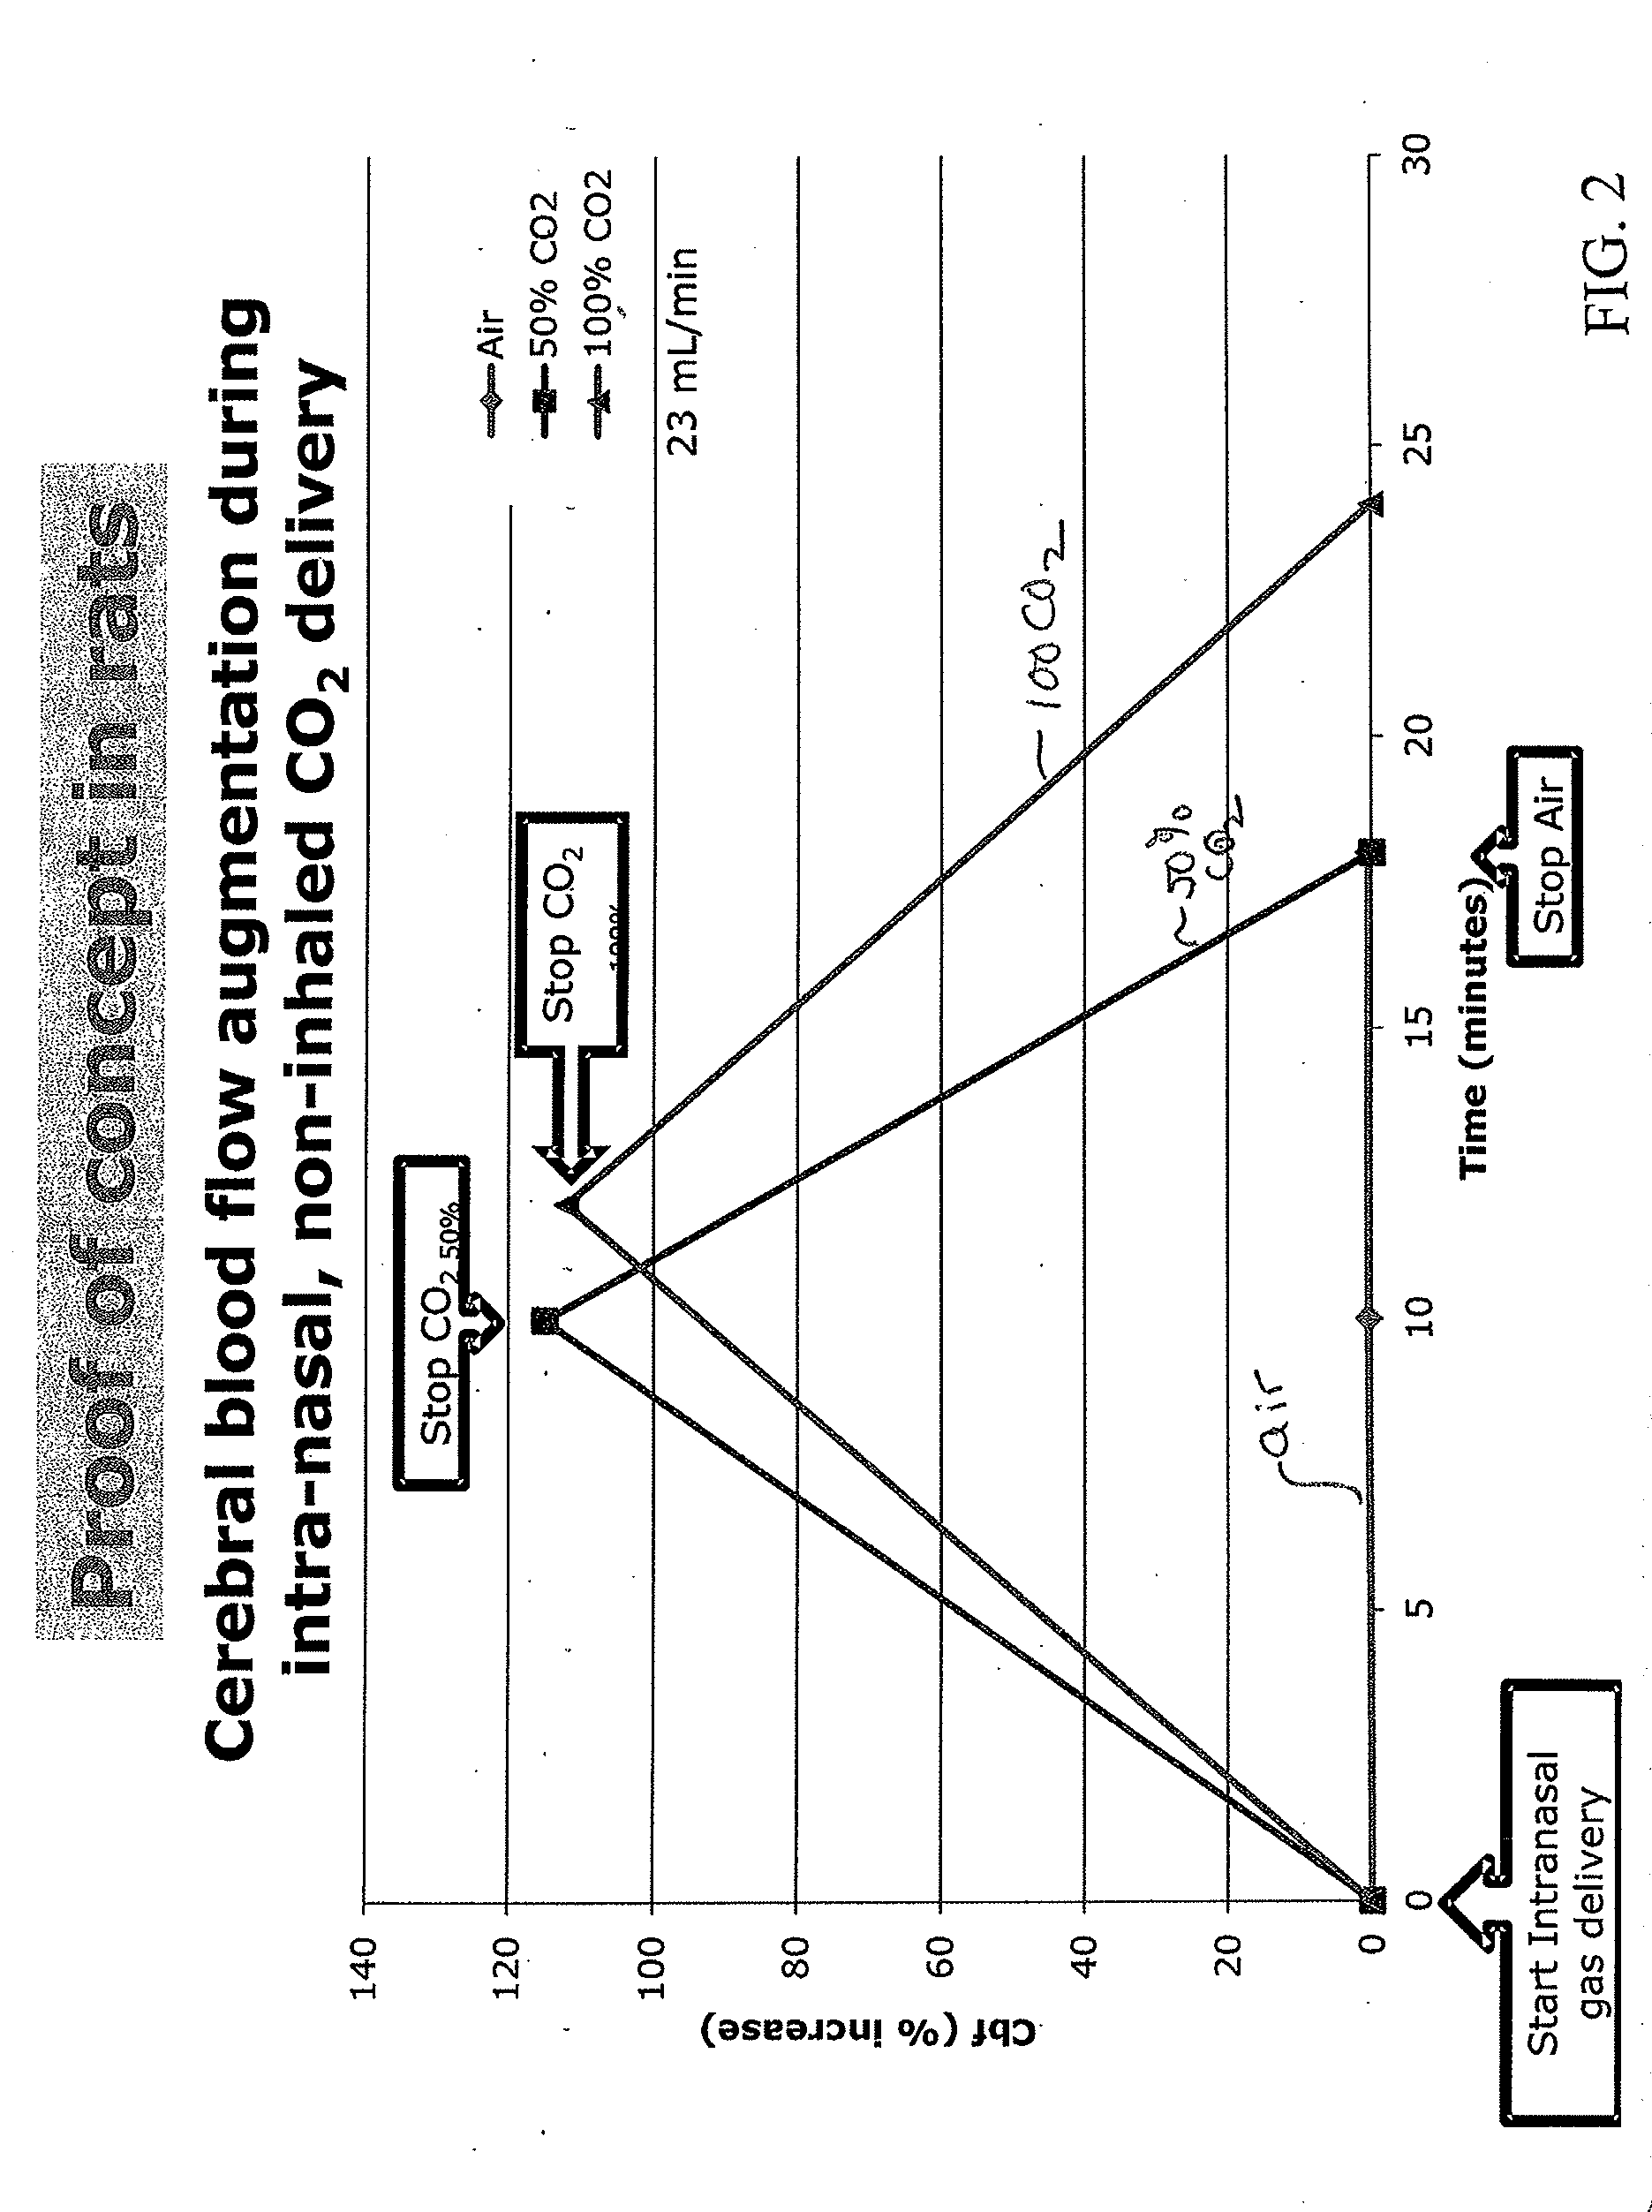 Apparatus and method for treating cerebral ischemia using non-inhaled carbon dioxide